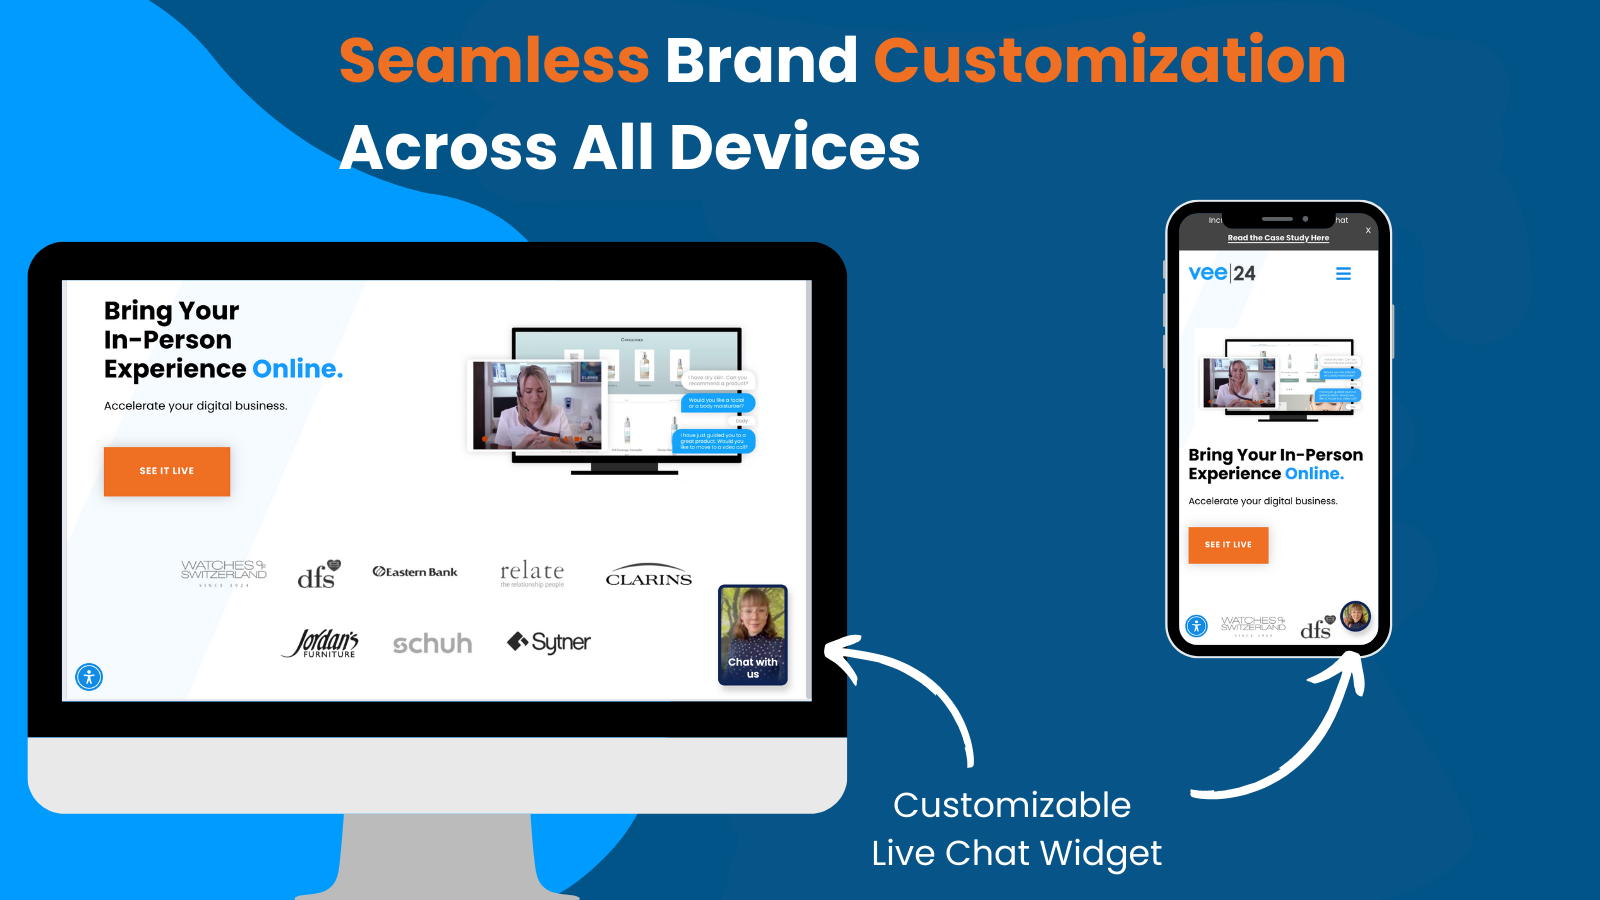 Customizable across all devices